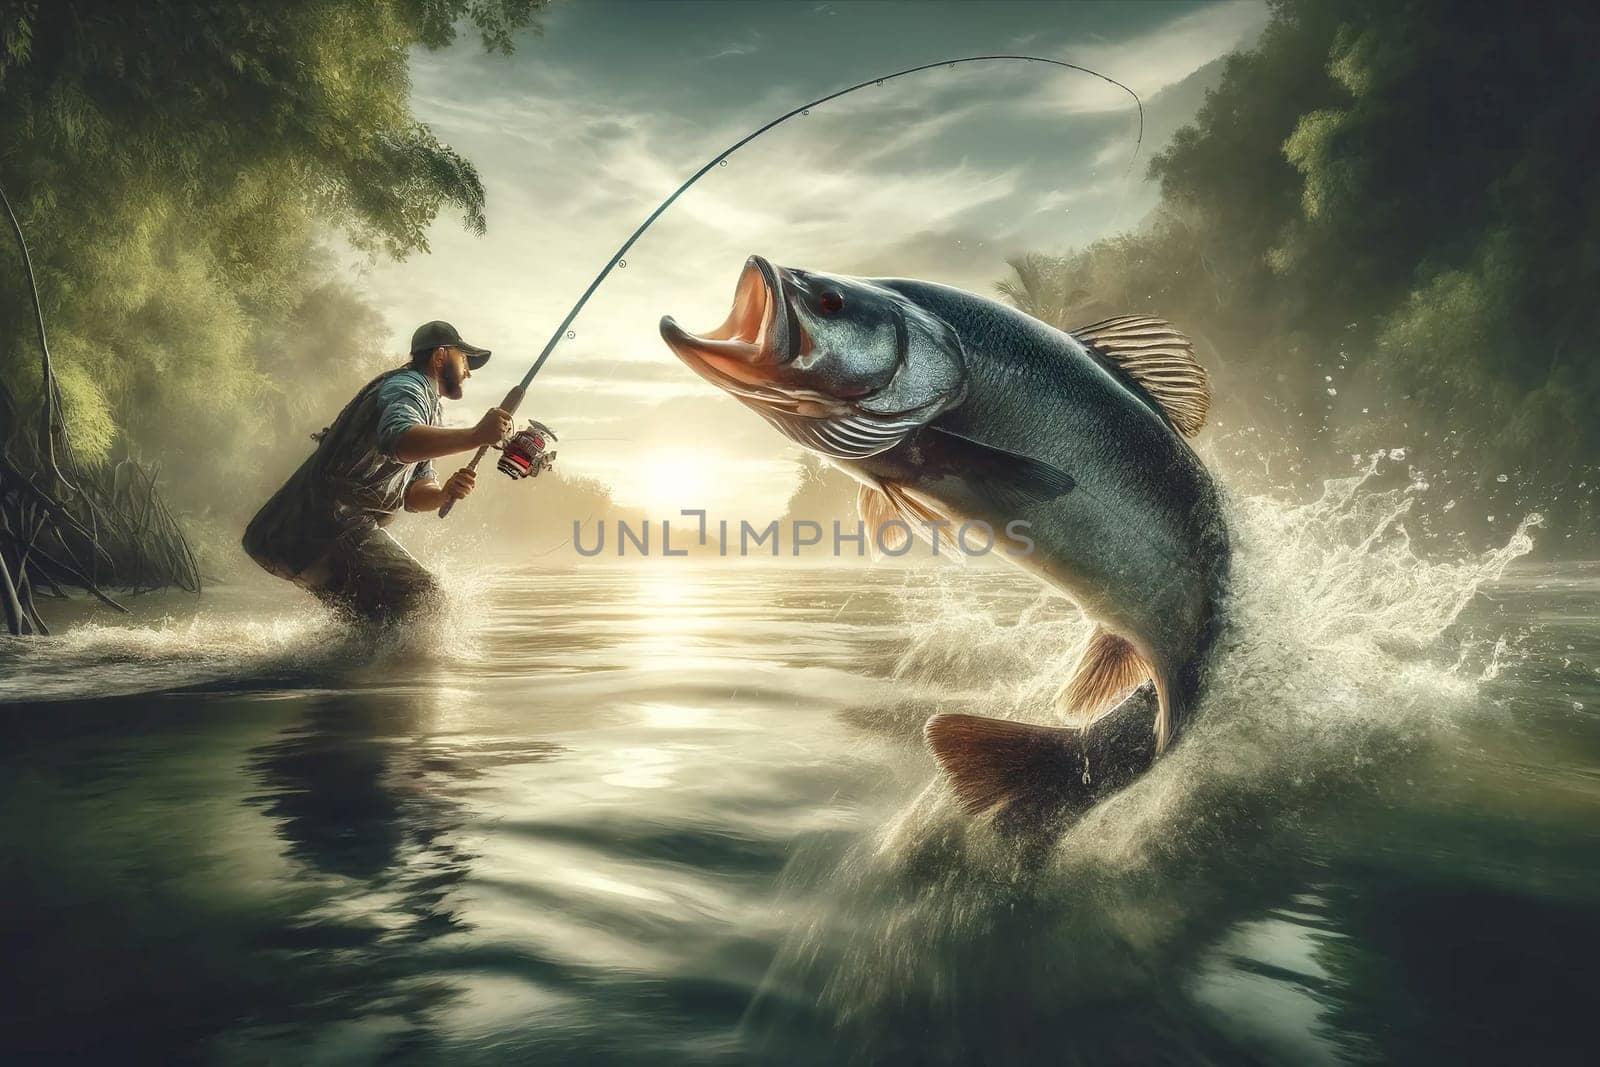 fisherman catching a large fish in a river at sunrise.